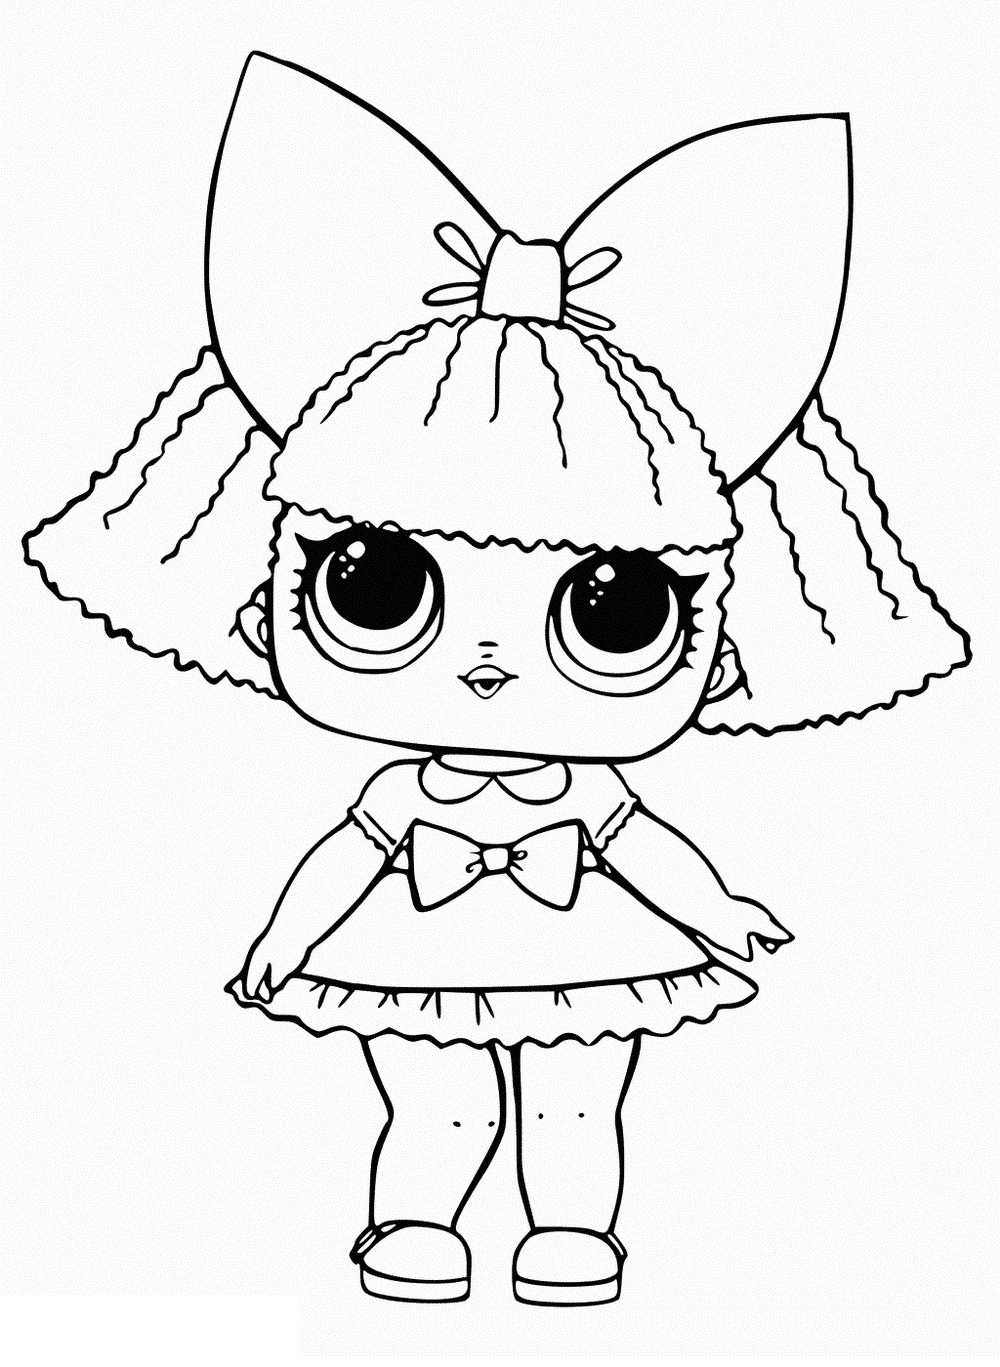 Coloring : Lol Doll Coloring Pages Printable Unicorn Free Bratz Printing  Little Sisters American Girl Omg Doll Coloring Pages ~ Sstra Coloring